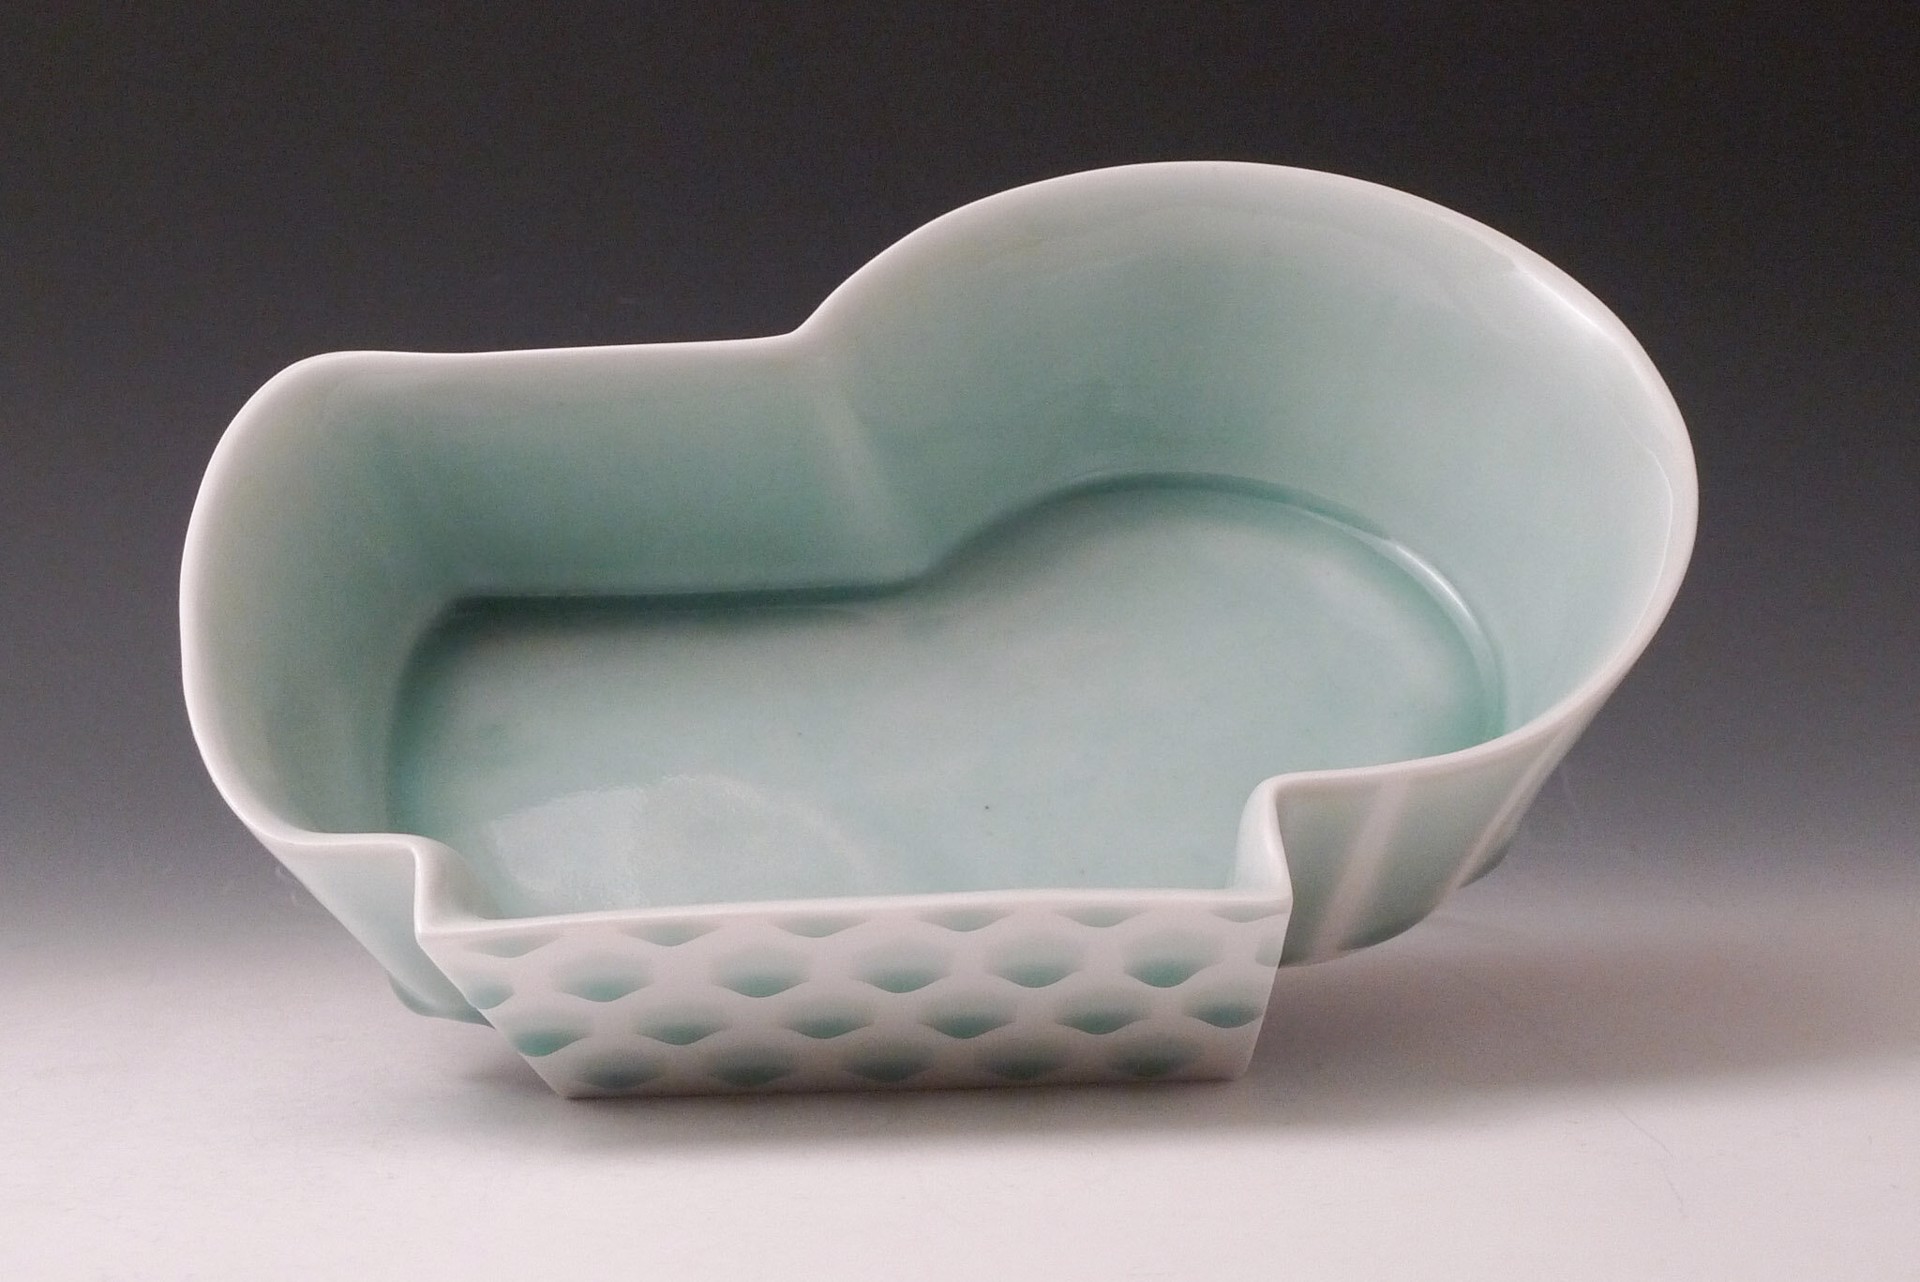 Asymmetric Bowl by Paul Donnelly